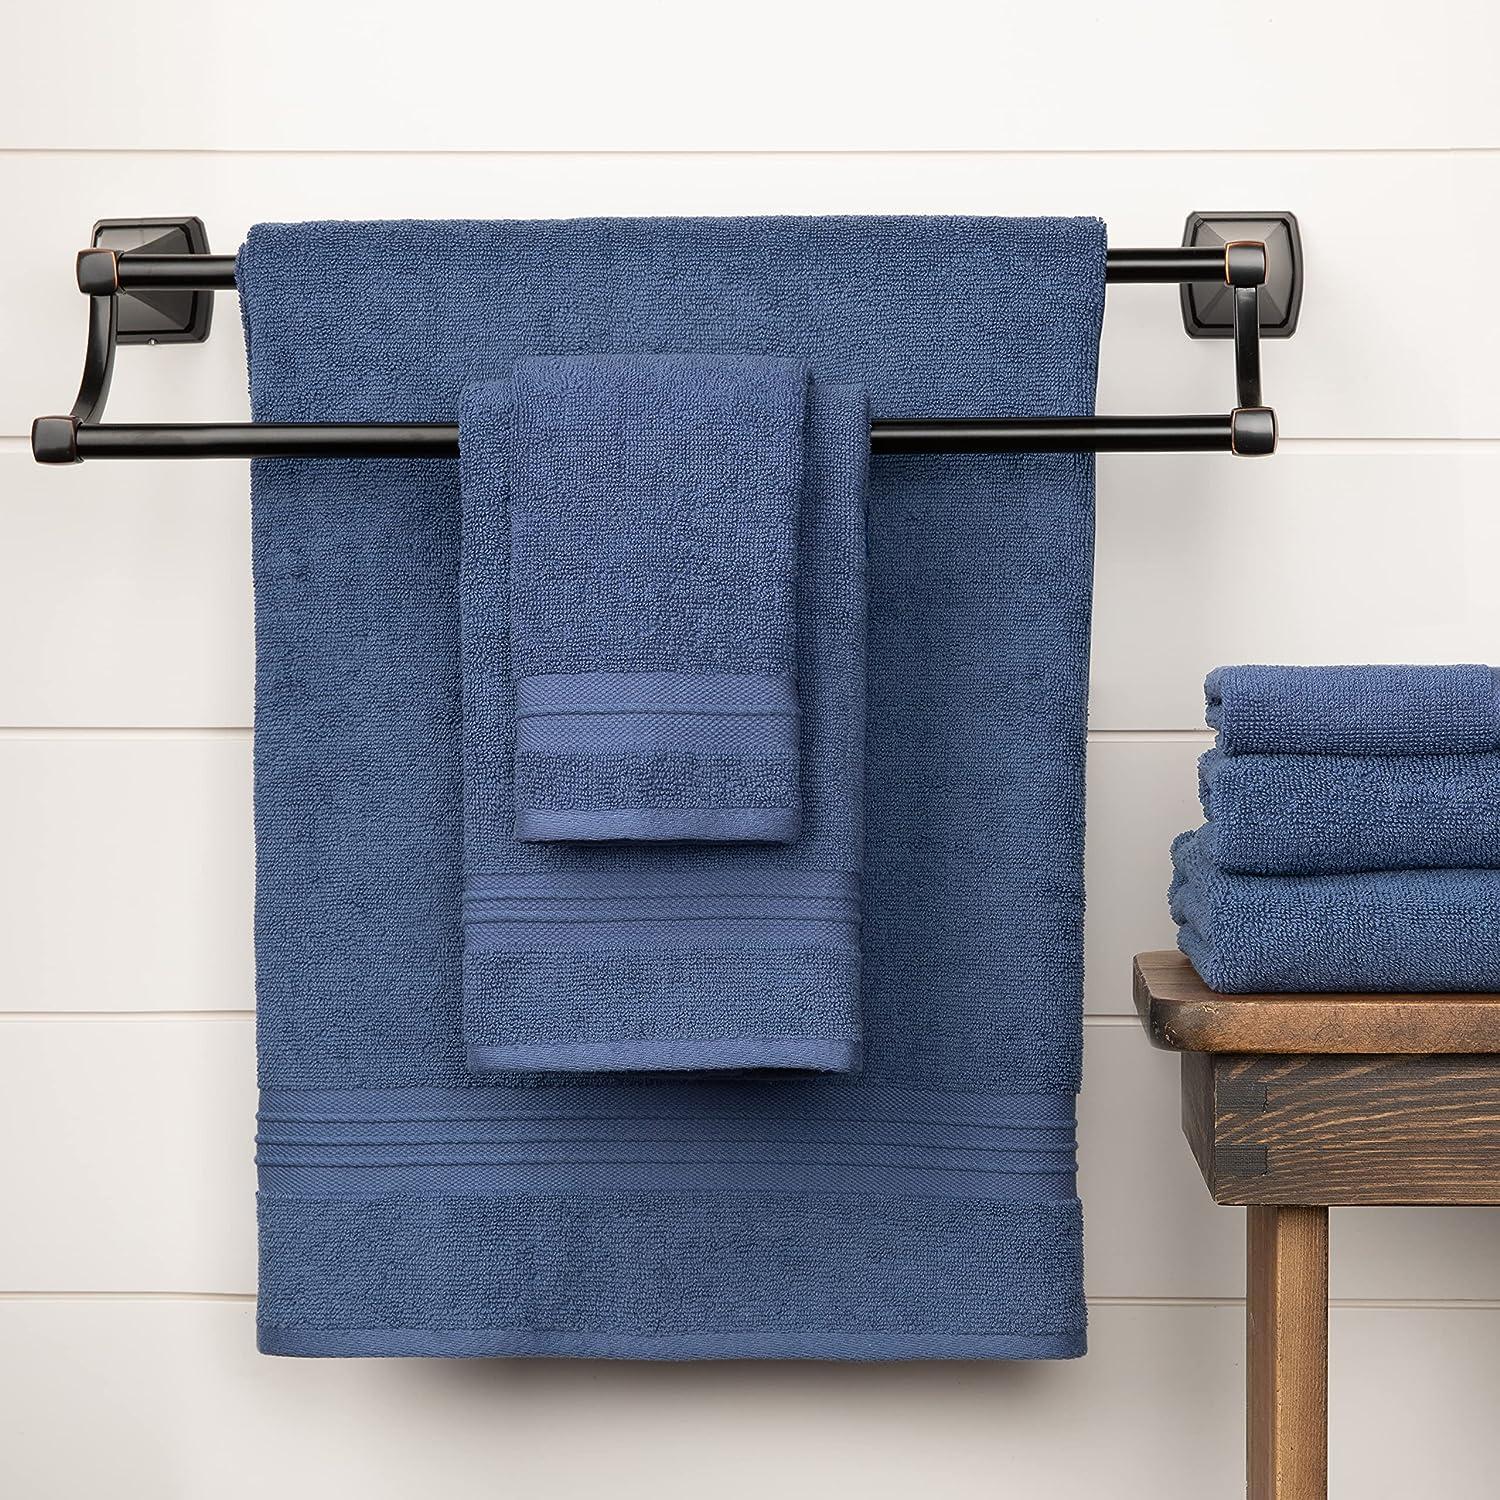 Sticky Toffee Cotton Terry Kitchen Dish Towel, Blue, 4 Pack, 28 in x 16 in